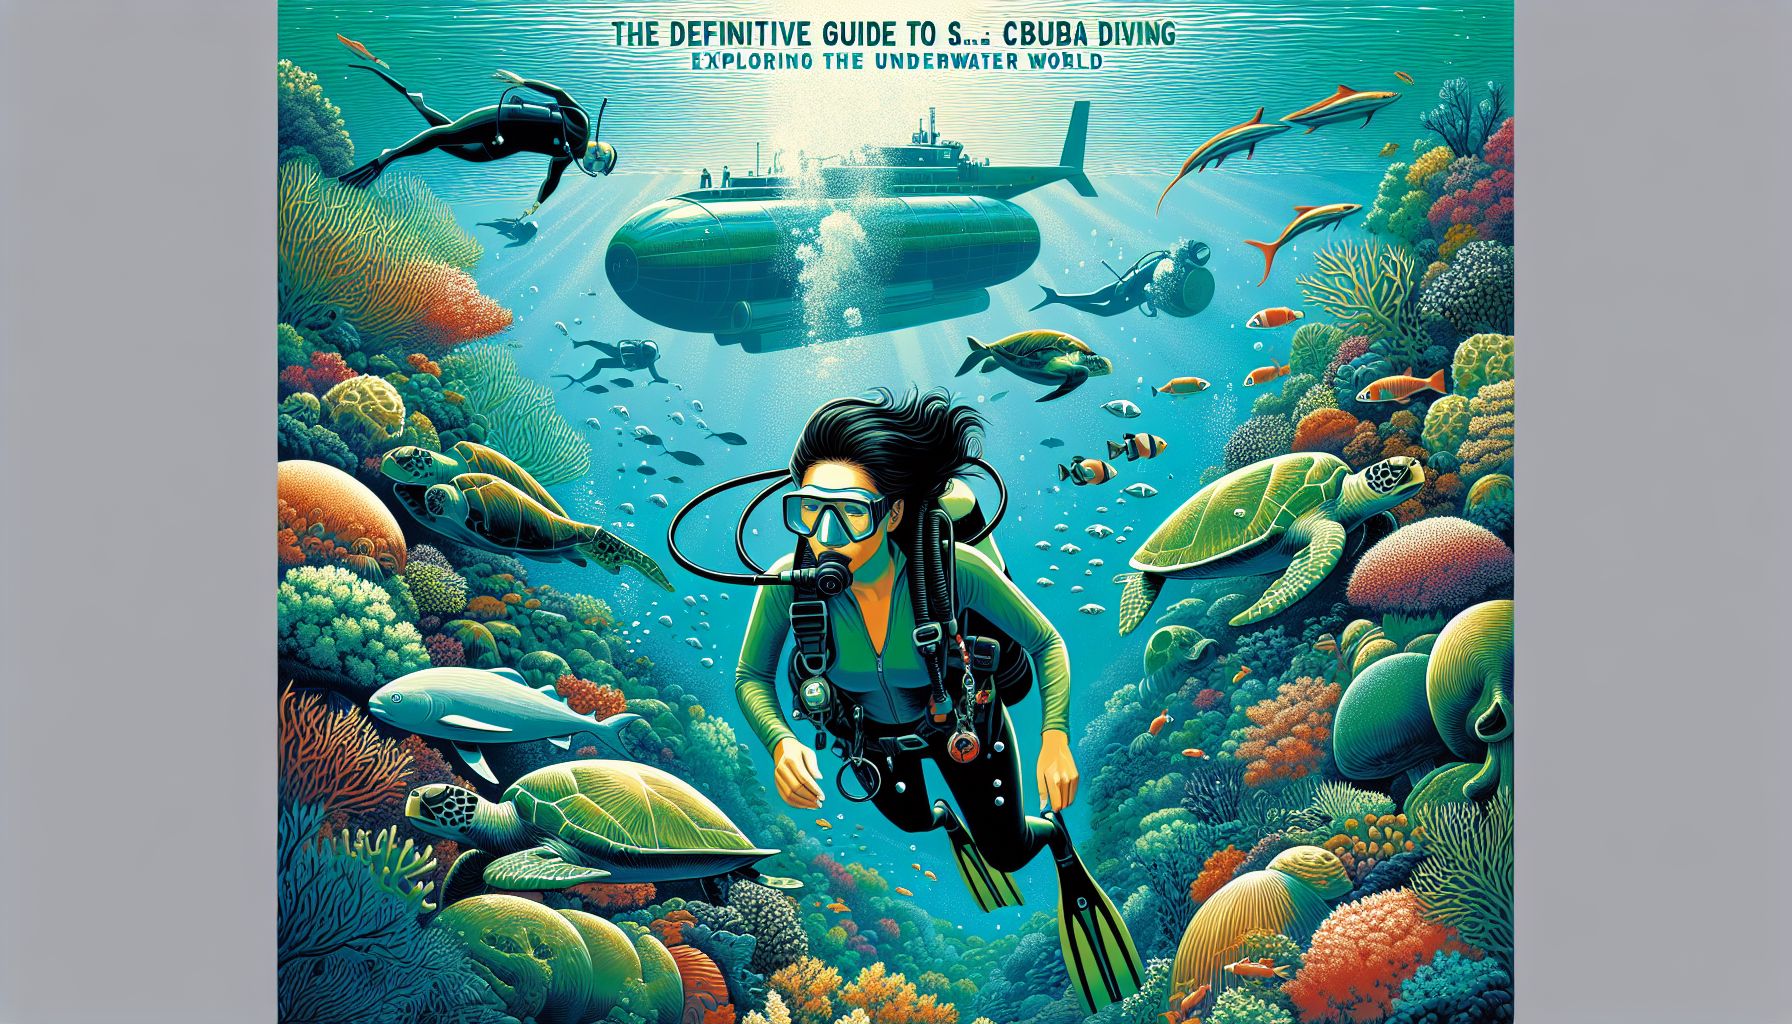 The Definitive Guide to Scuba Diving: Exploring the Underwater World